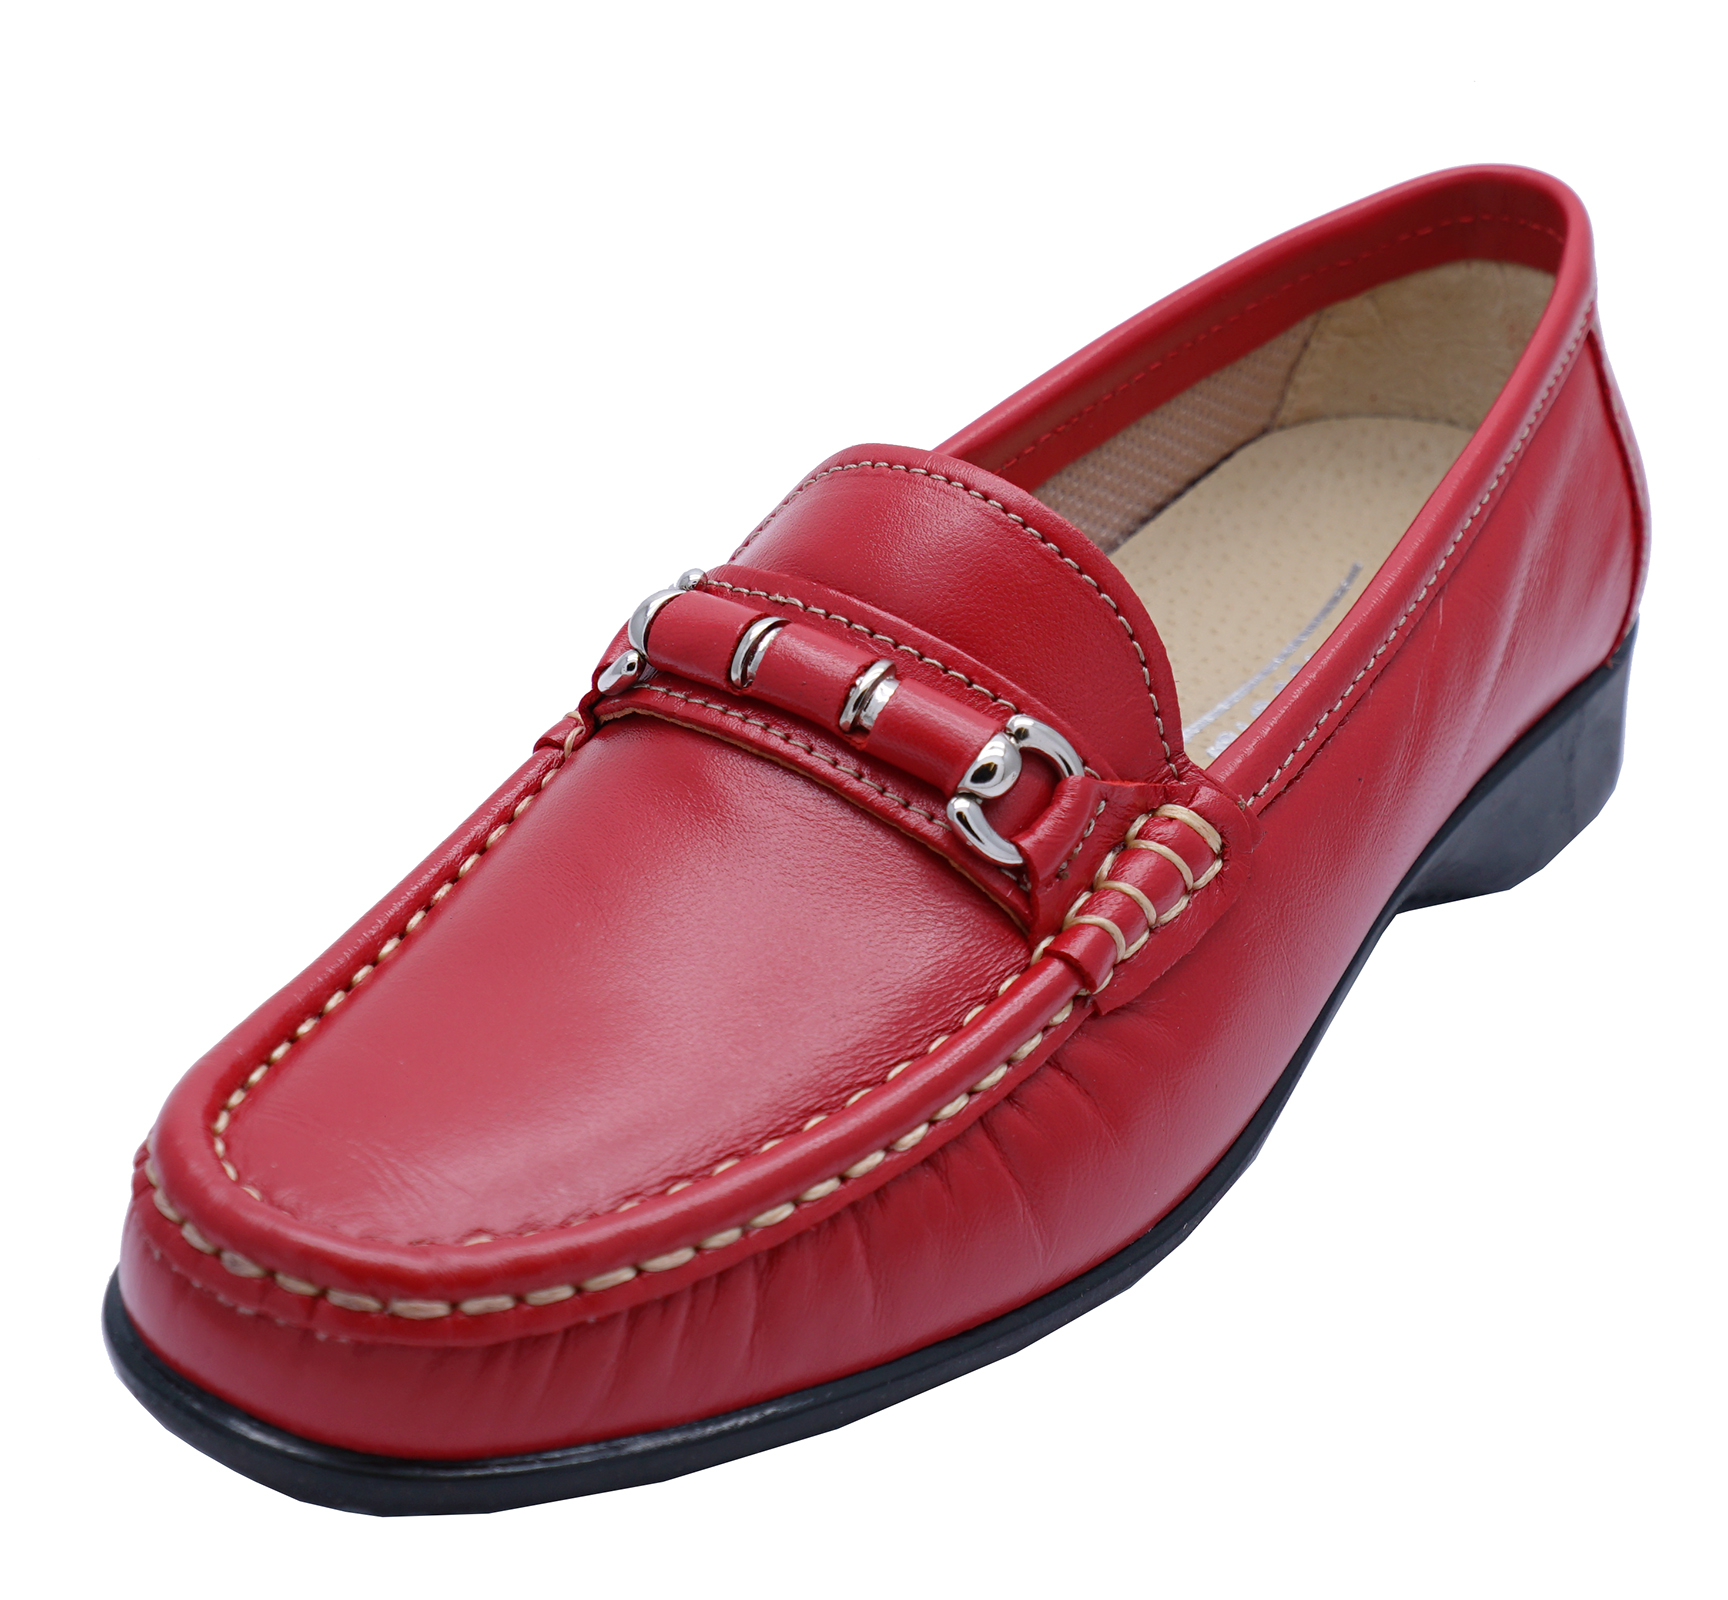 WOMENS RED GENUINE LEATHER COTSWOLD COMFORT LOAFERS SLIP-ON CASUAL ...